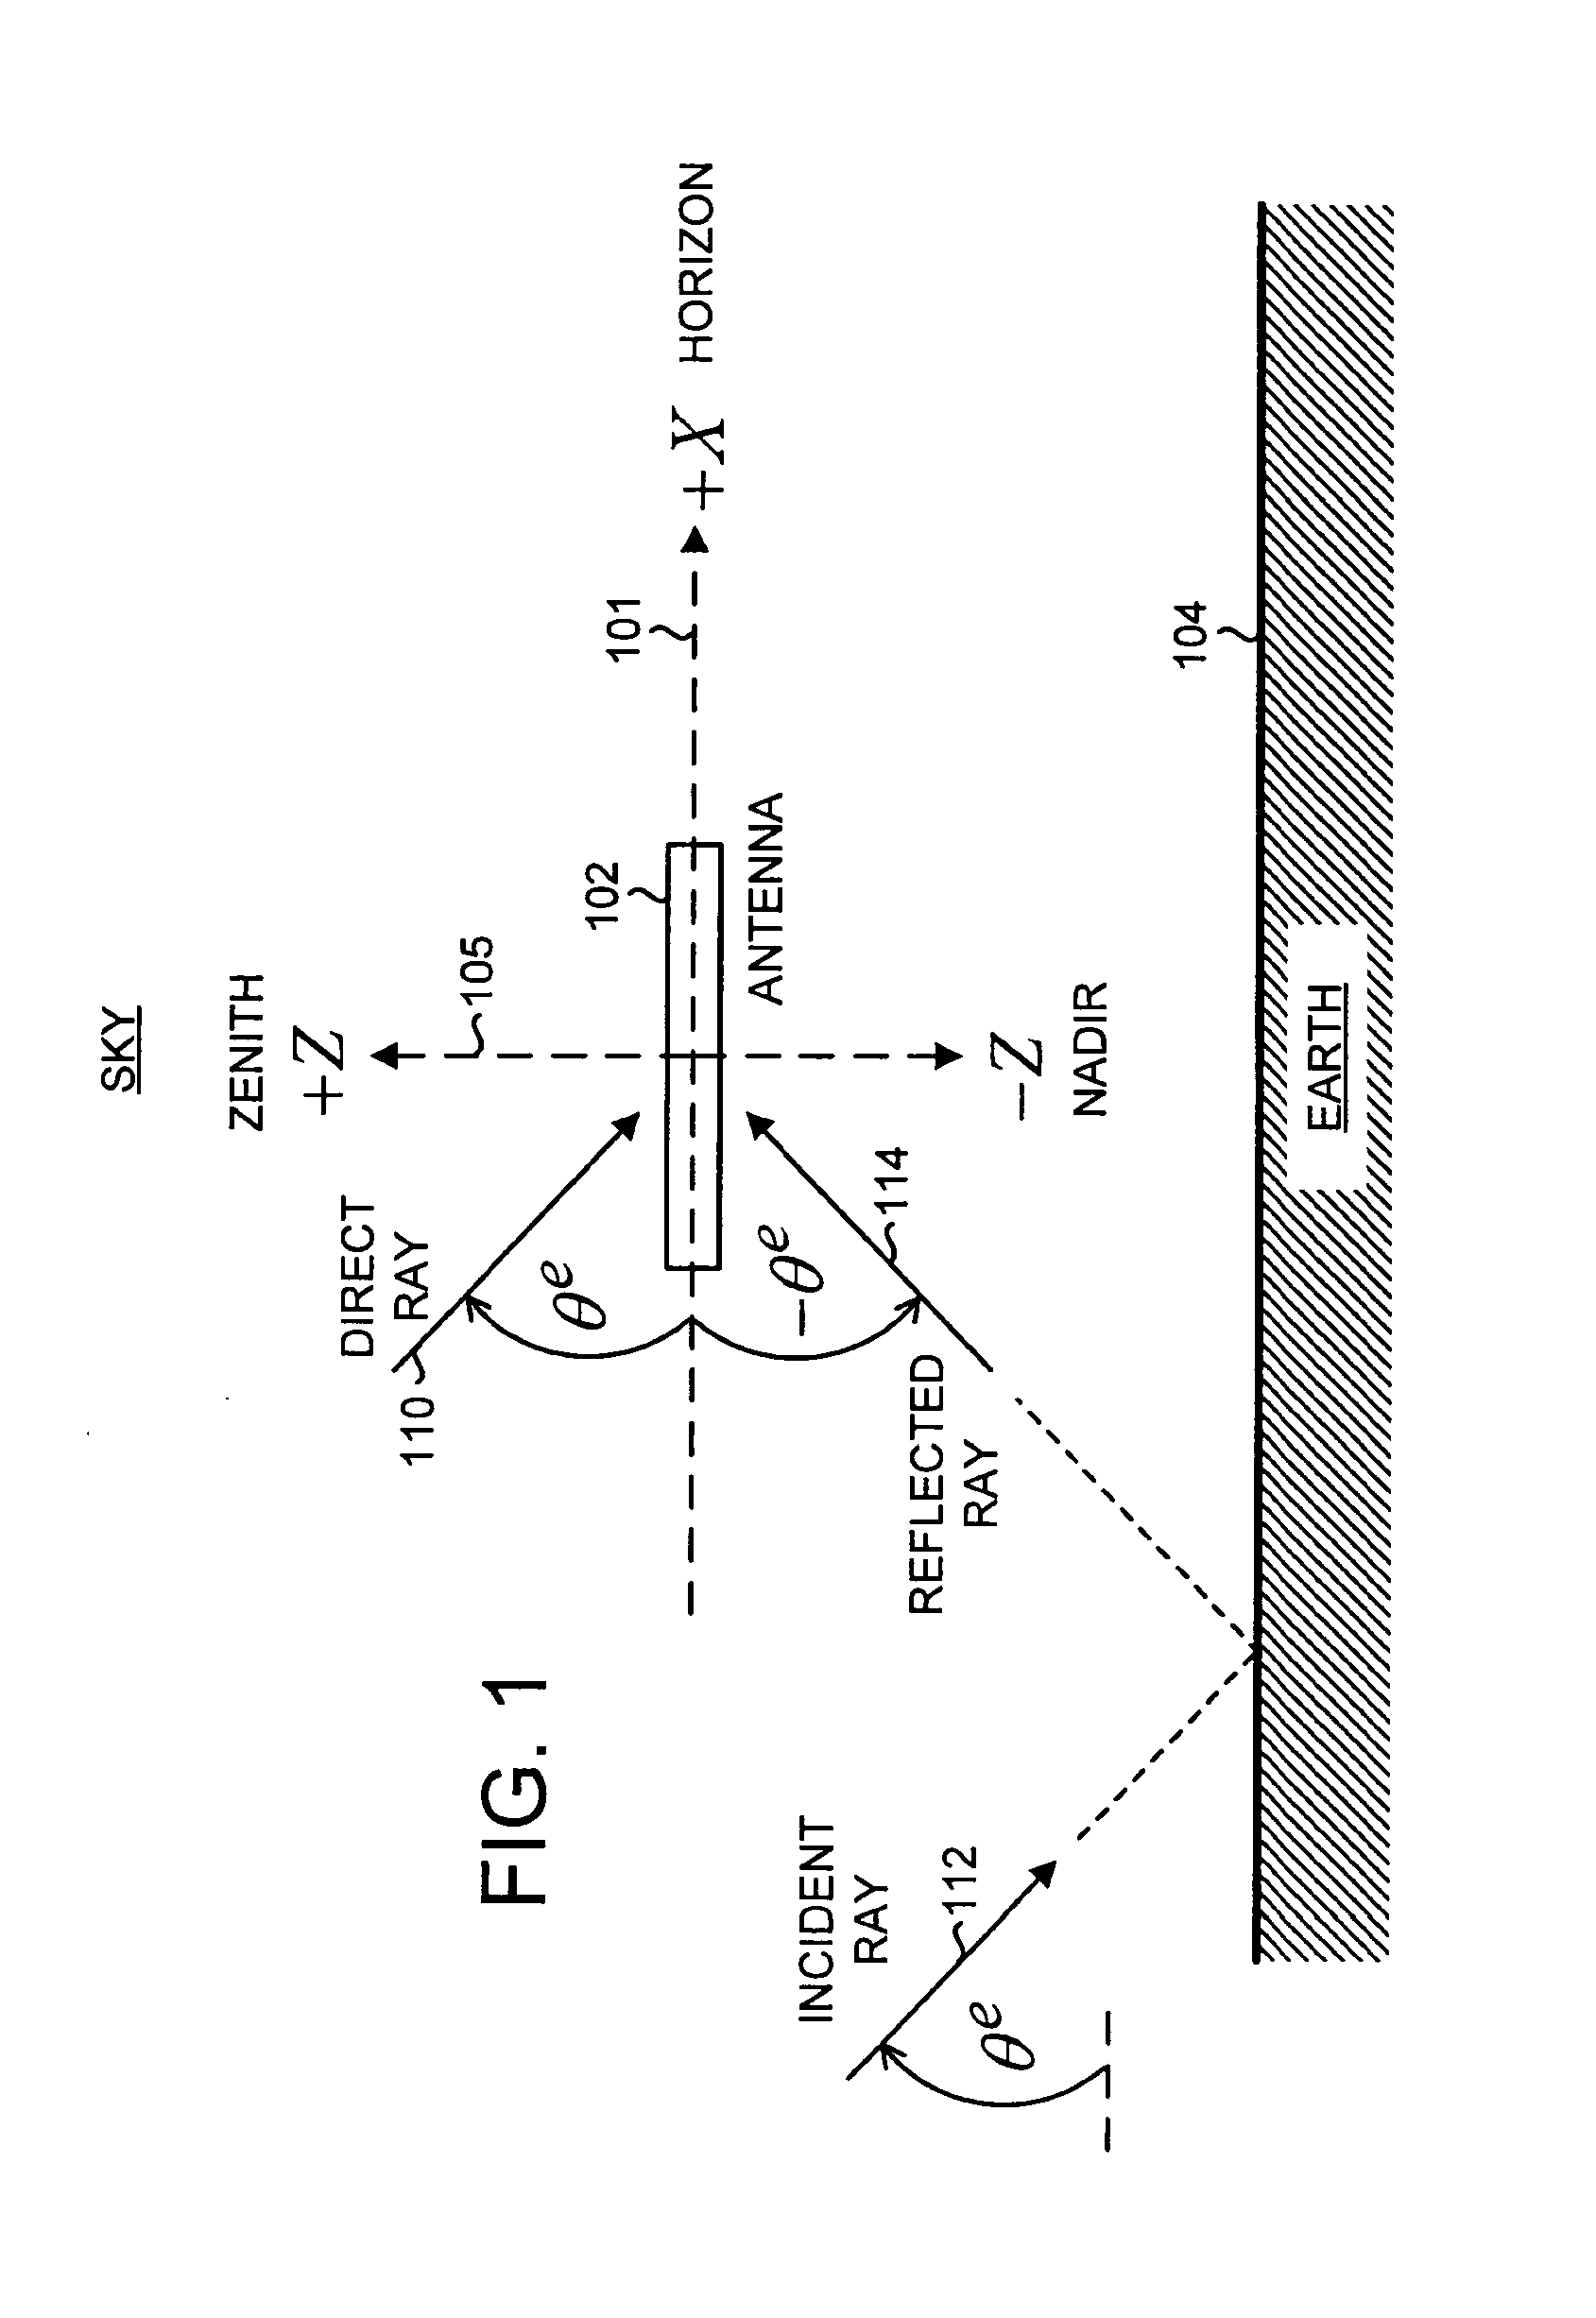 Compact Antenna System with Reduced Multipath Reception